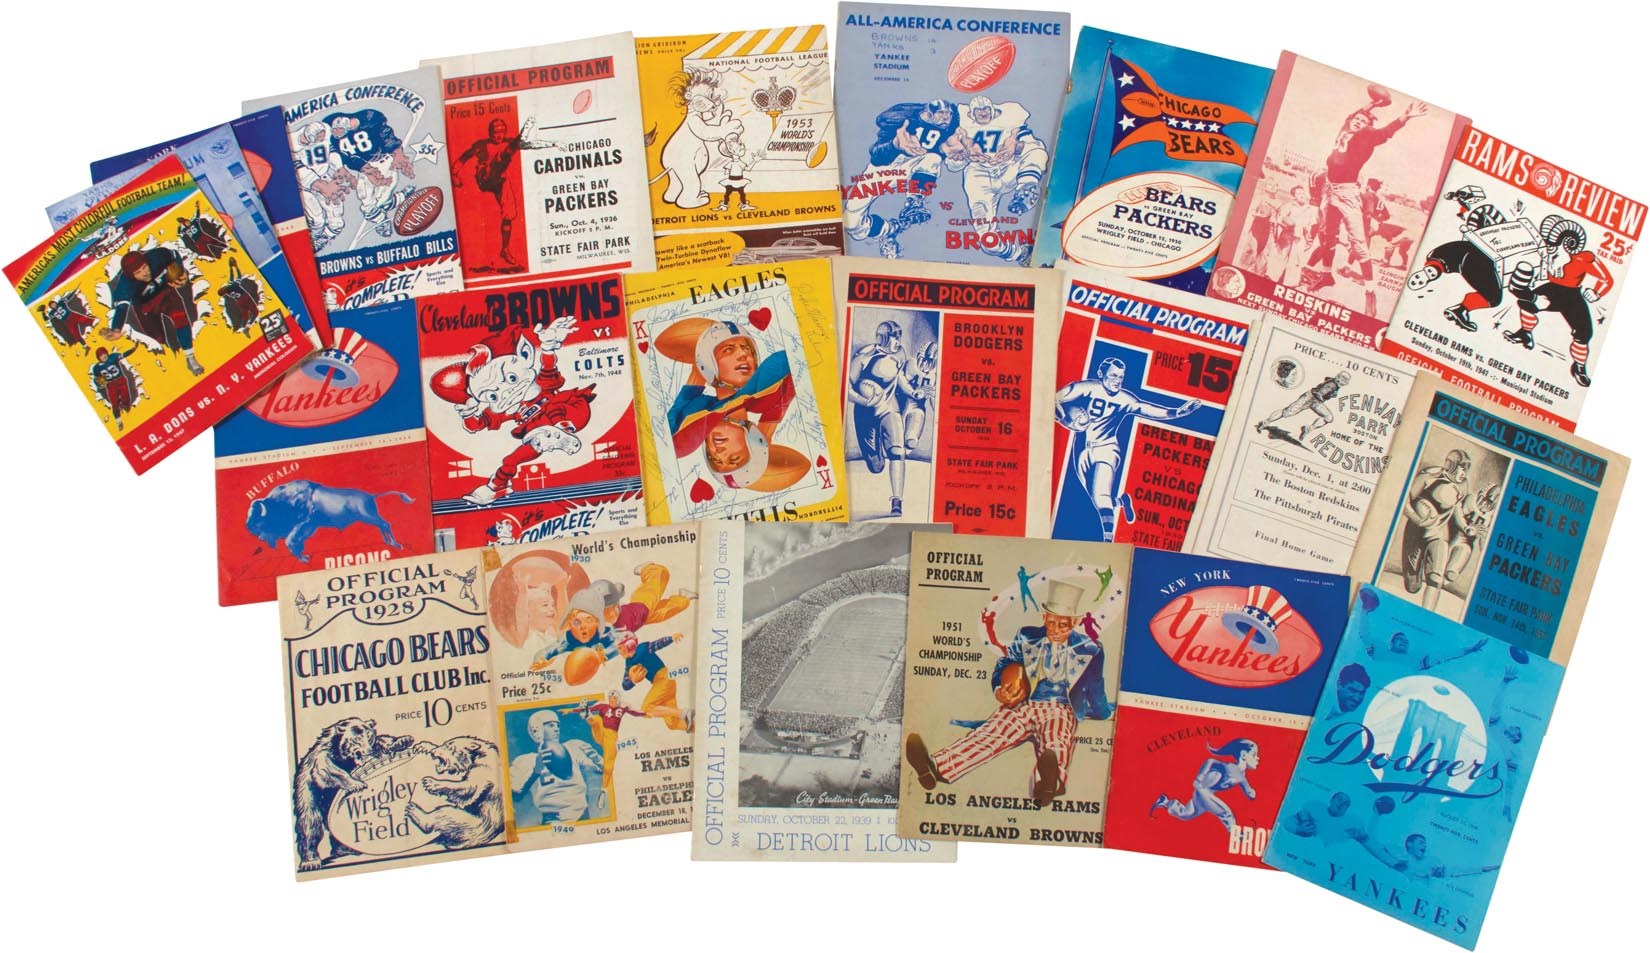 Football - 1920s-60s NFL & AAFC Football Program Collection with Green Bay Packers (80+)